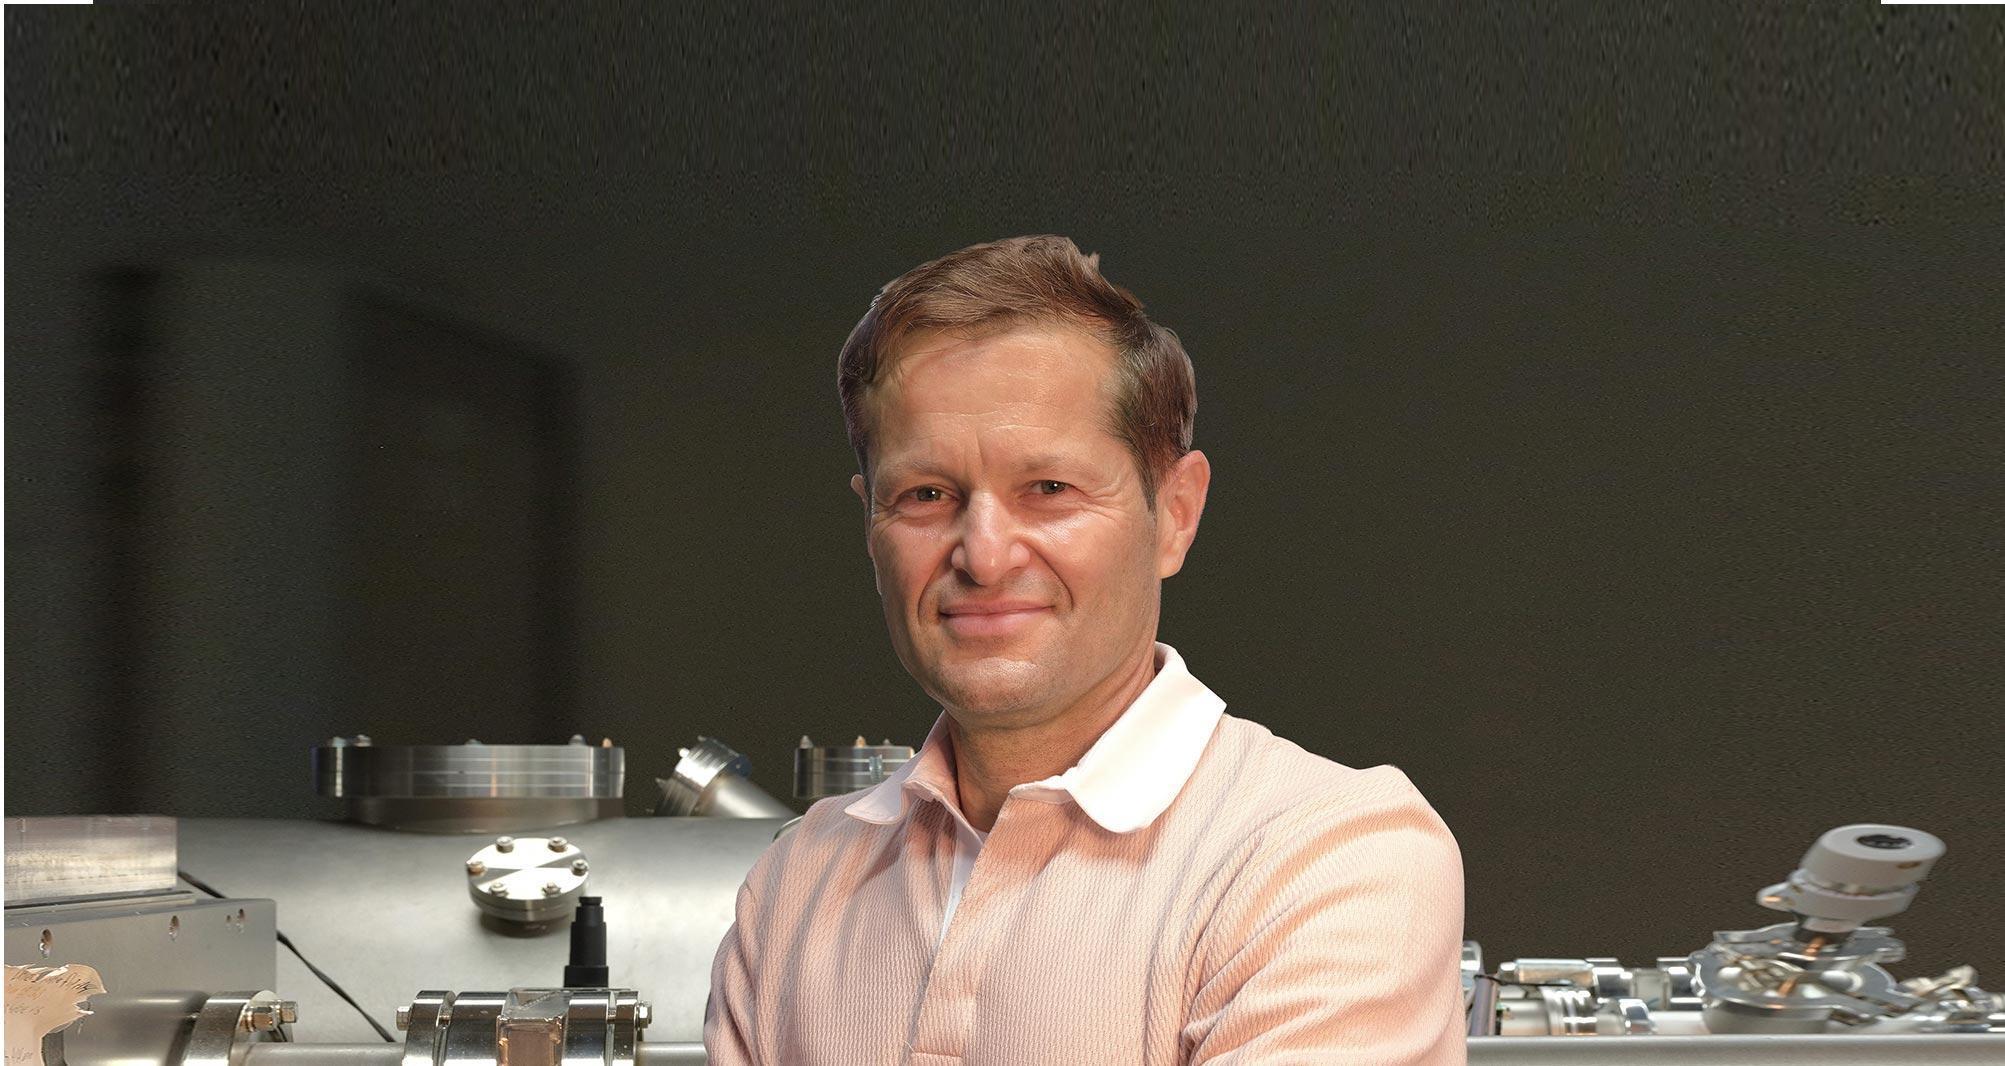 Interview With the Recipient of the 2022 Wolf Prize in Physics, Professor Ferenc Krausz